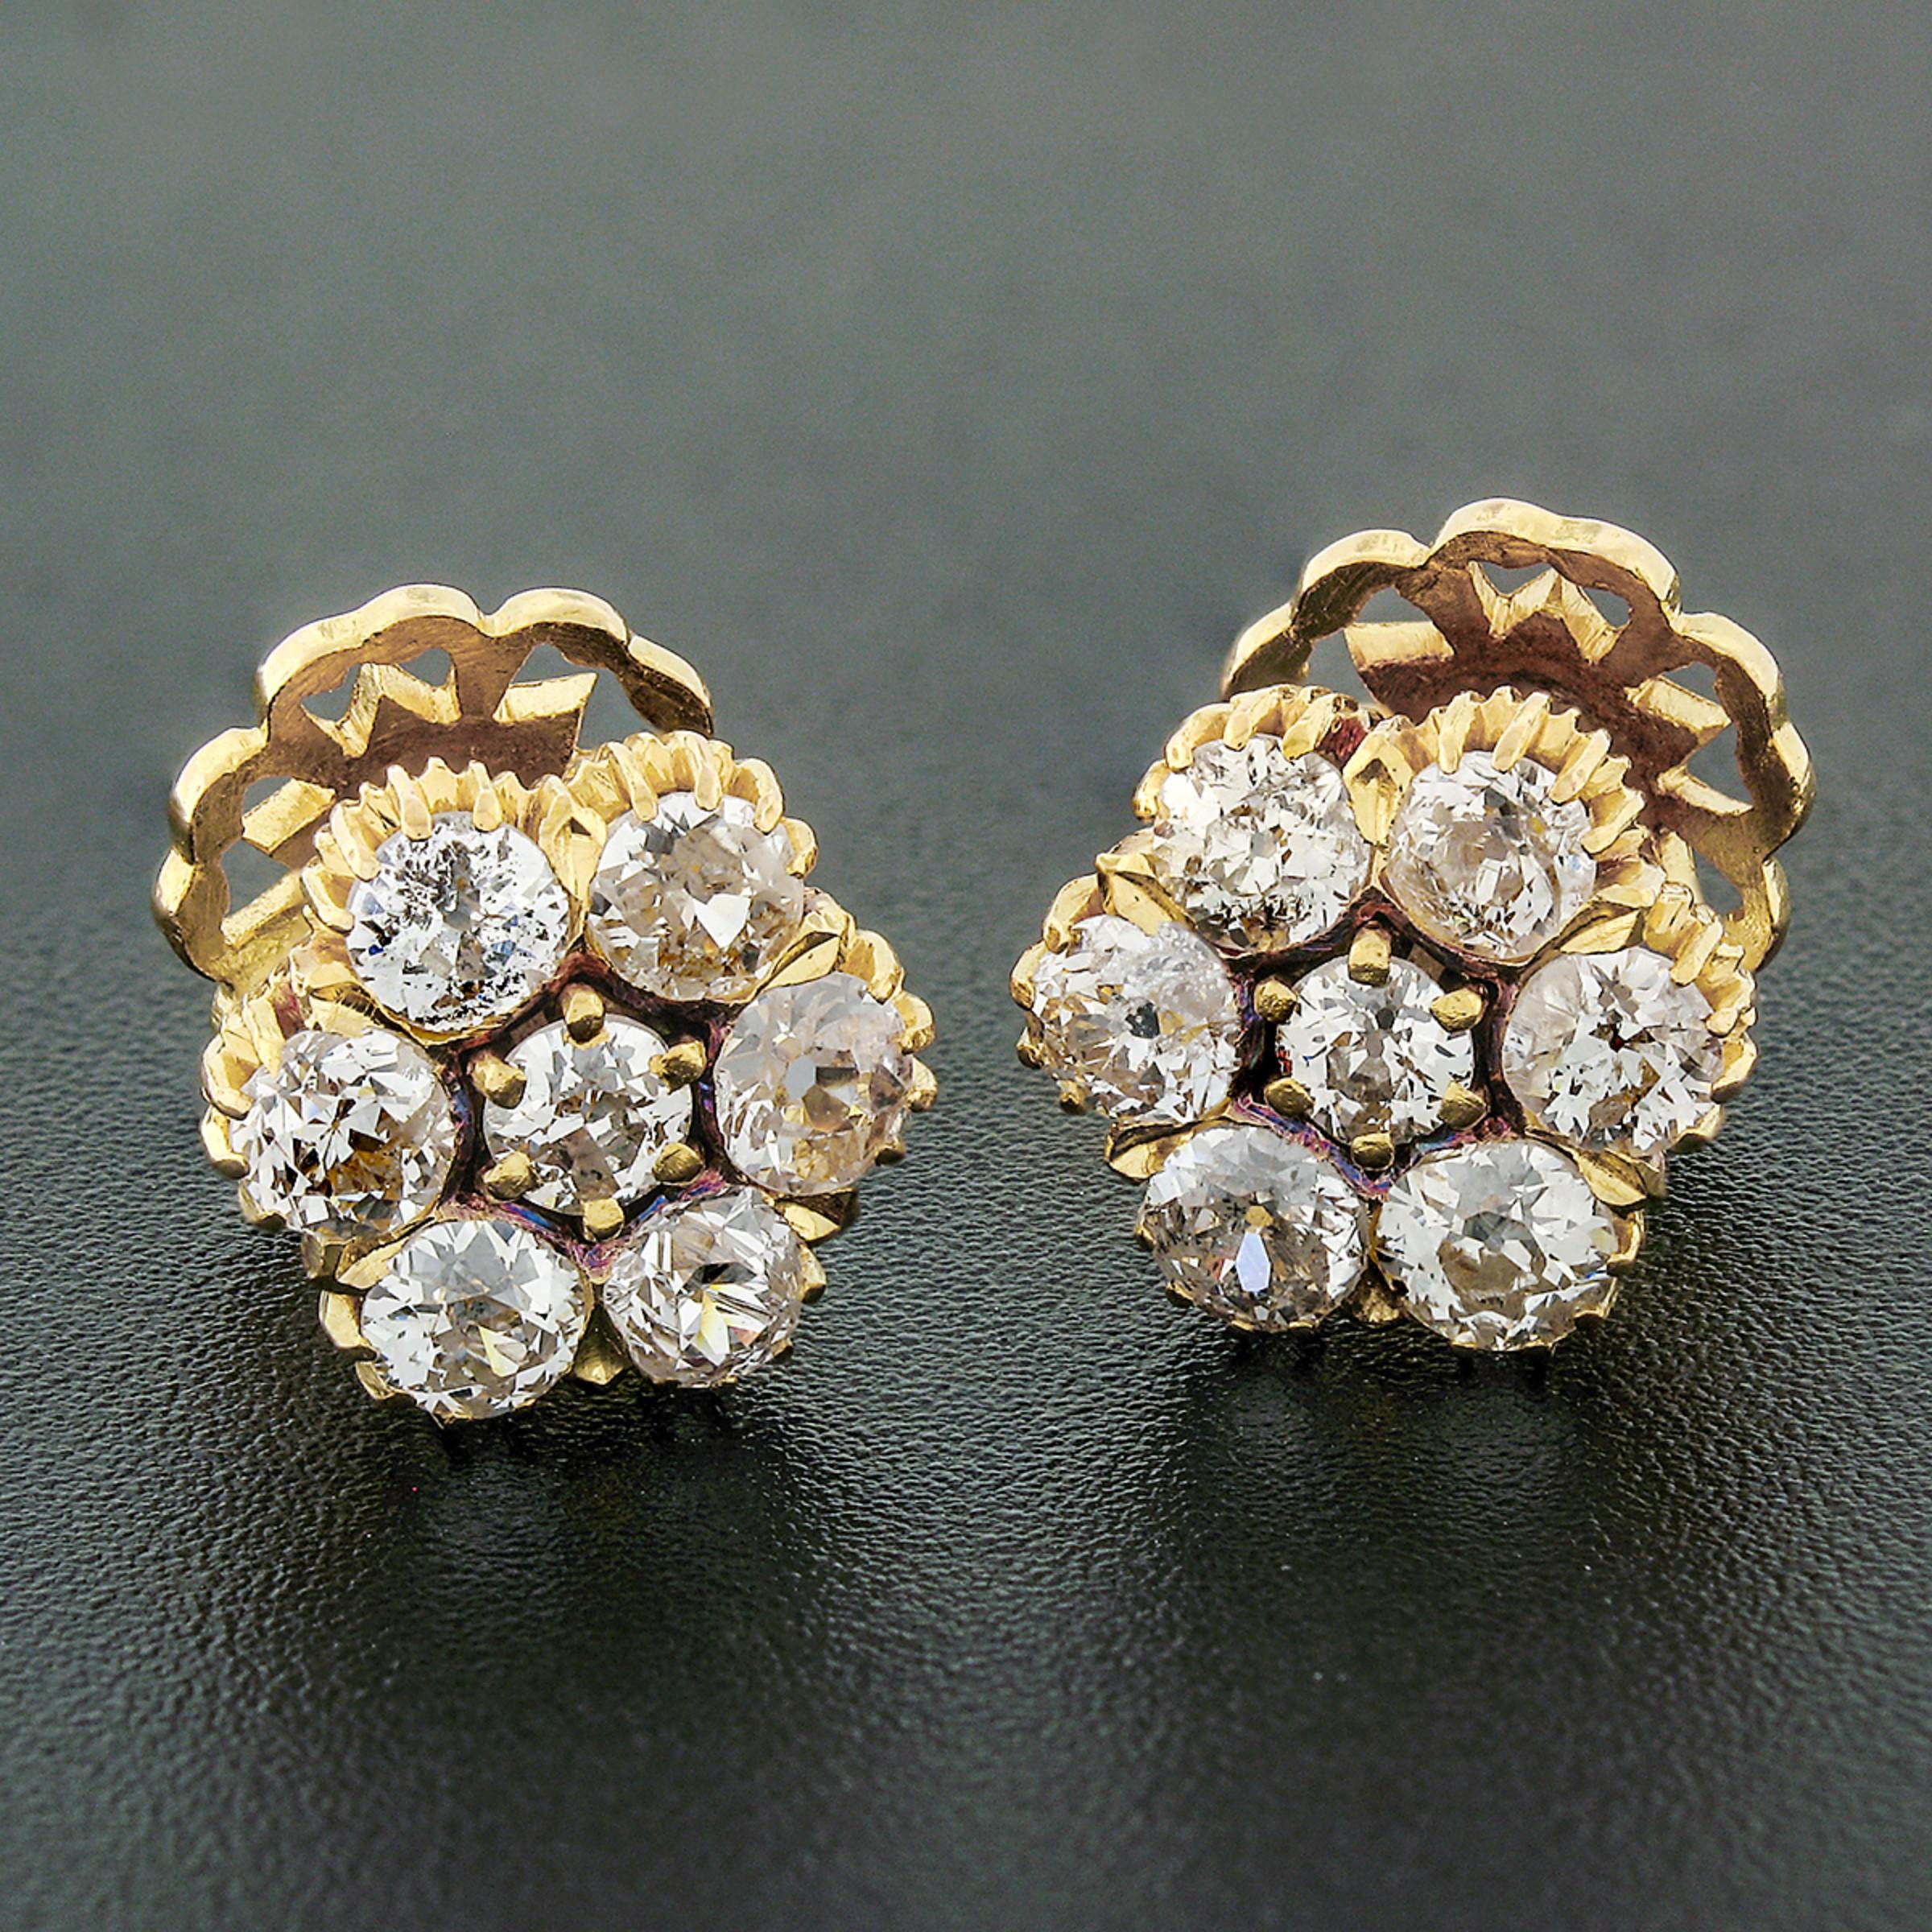 These RARE fancy antique earrings are crafted in solid 18k yellow gold and feature a lovely cluster flower design set with 4 old cut diamonds throughout. The diamonds are old mine and European cut stones, neatly sitting in multi-prong settings